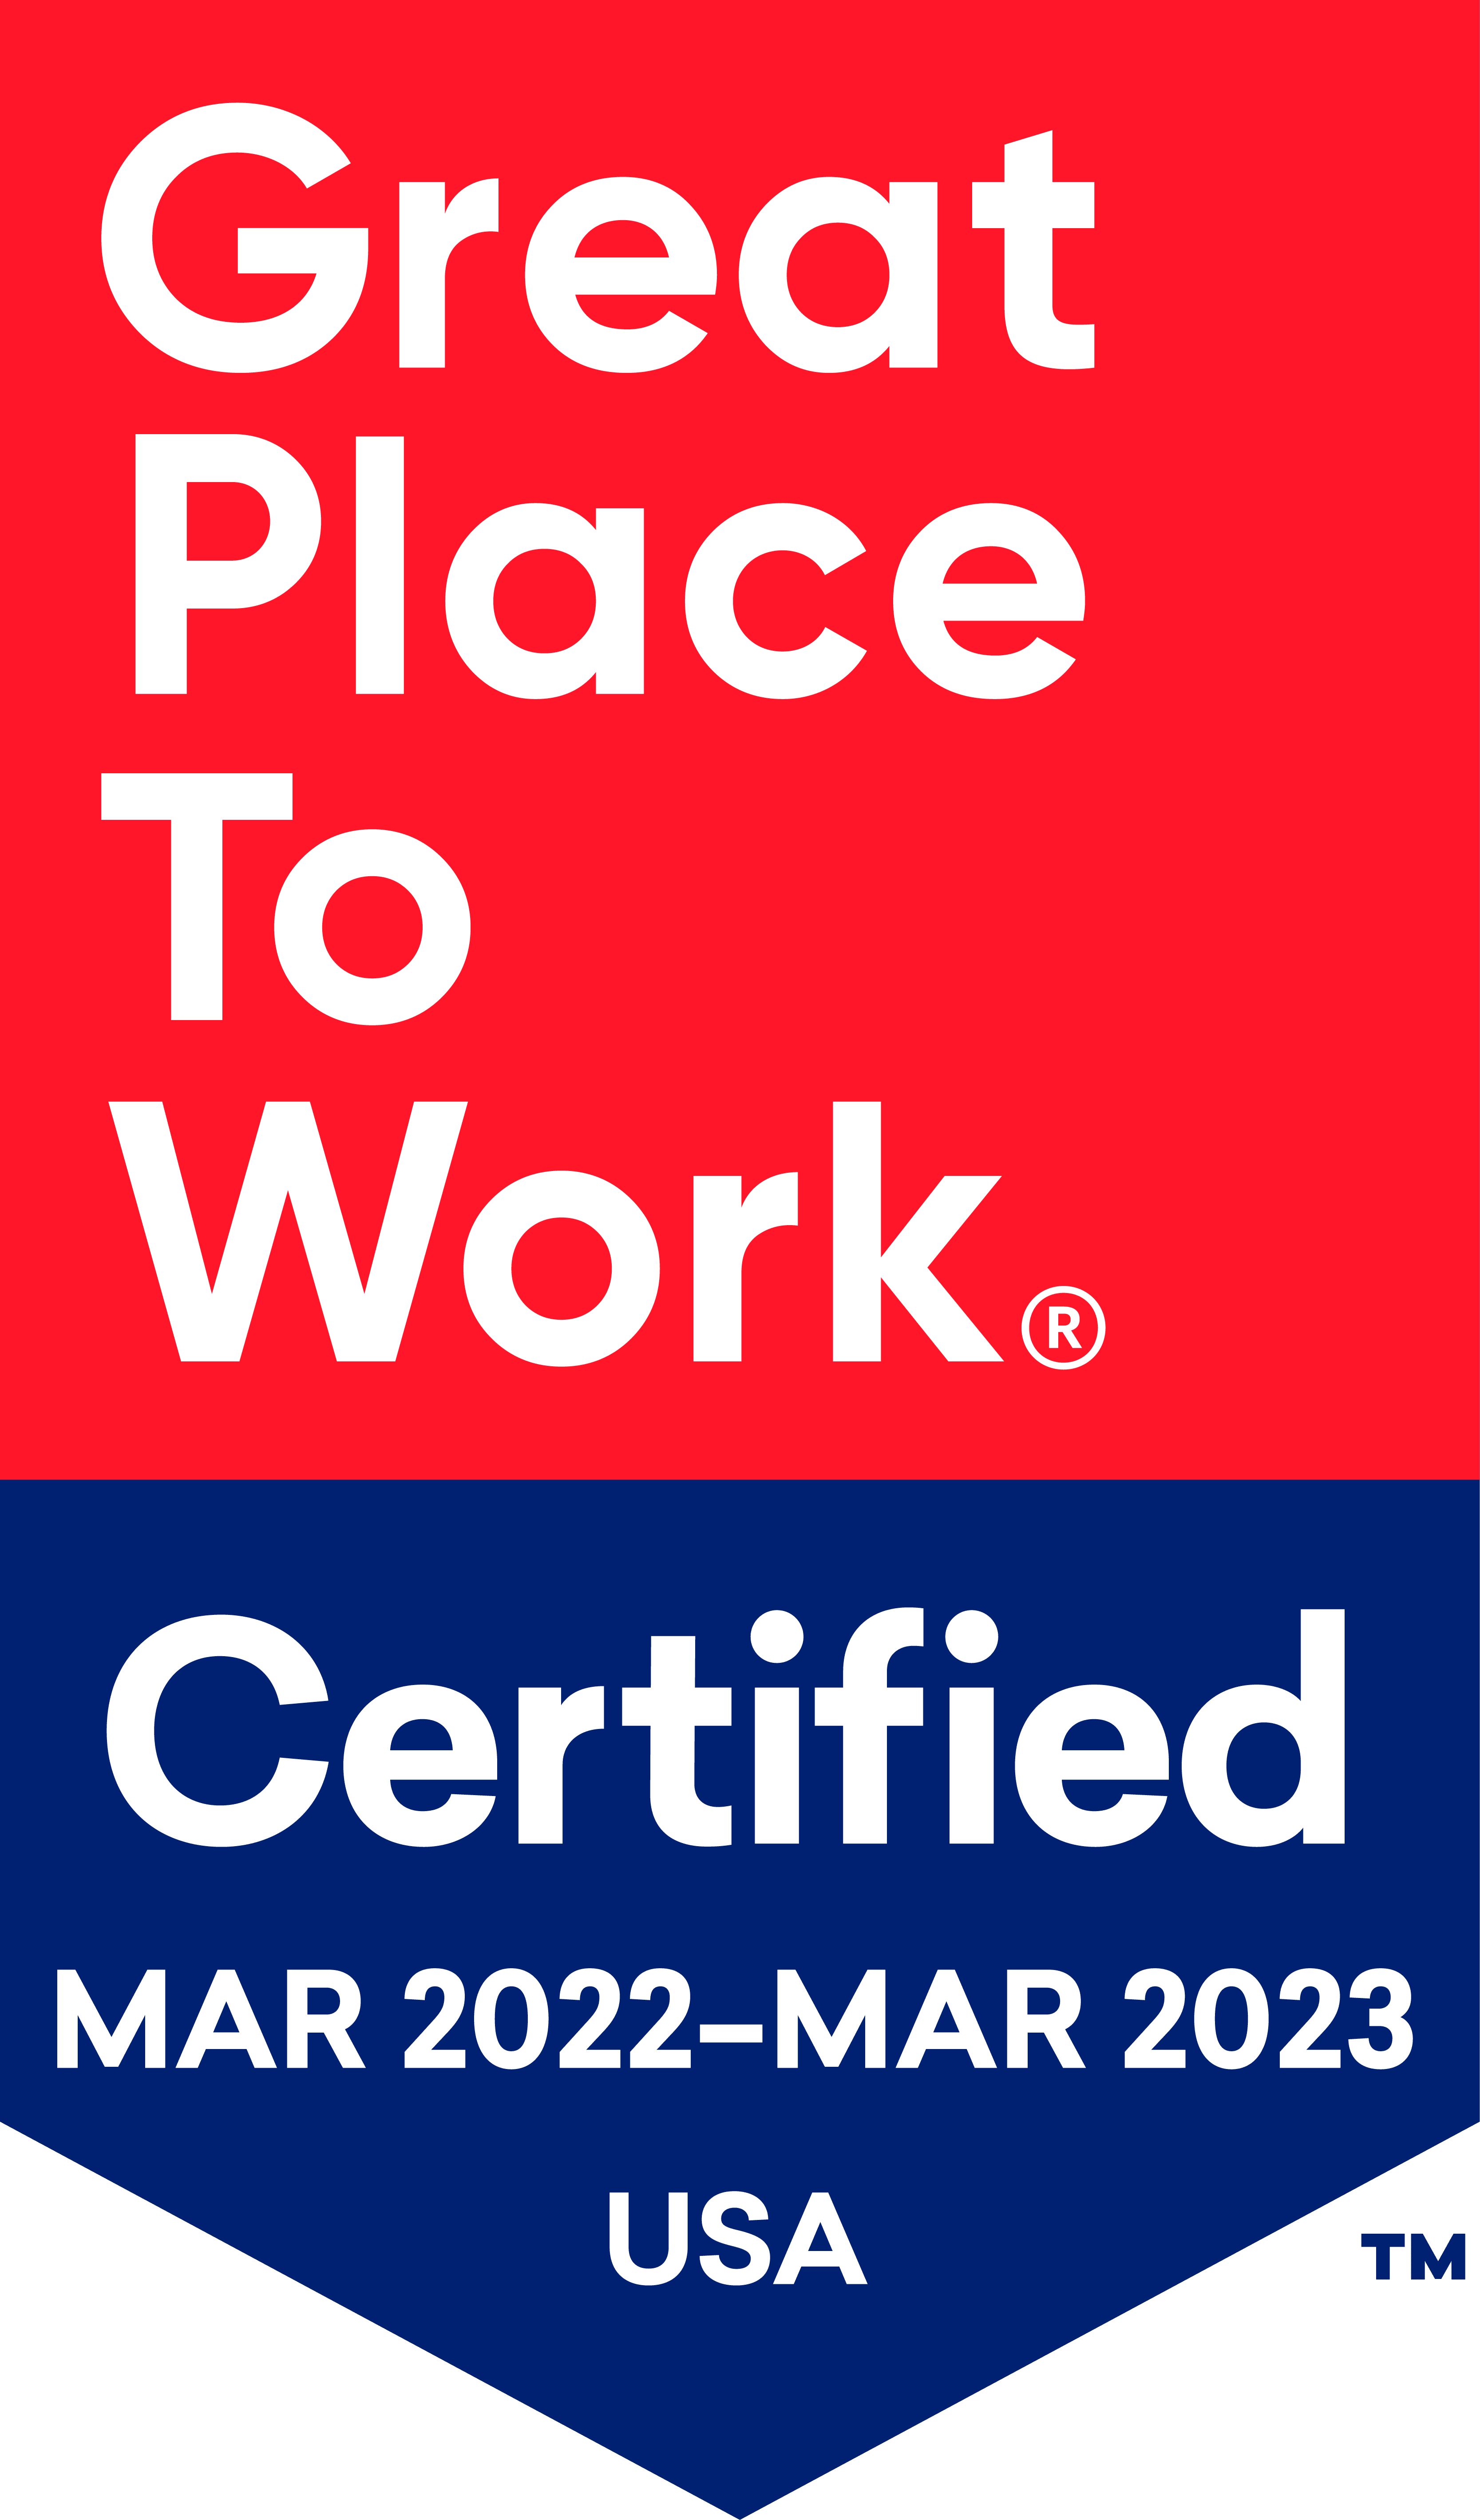 Great place to work badge for Keystone Commons